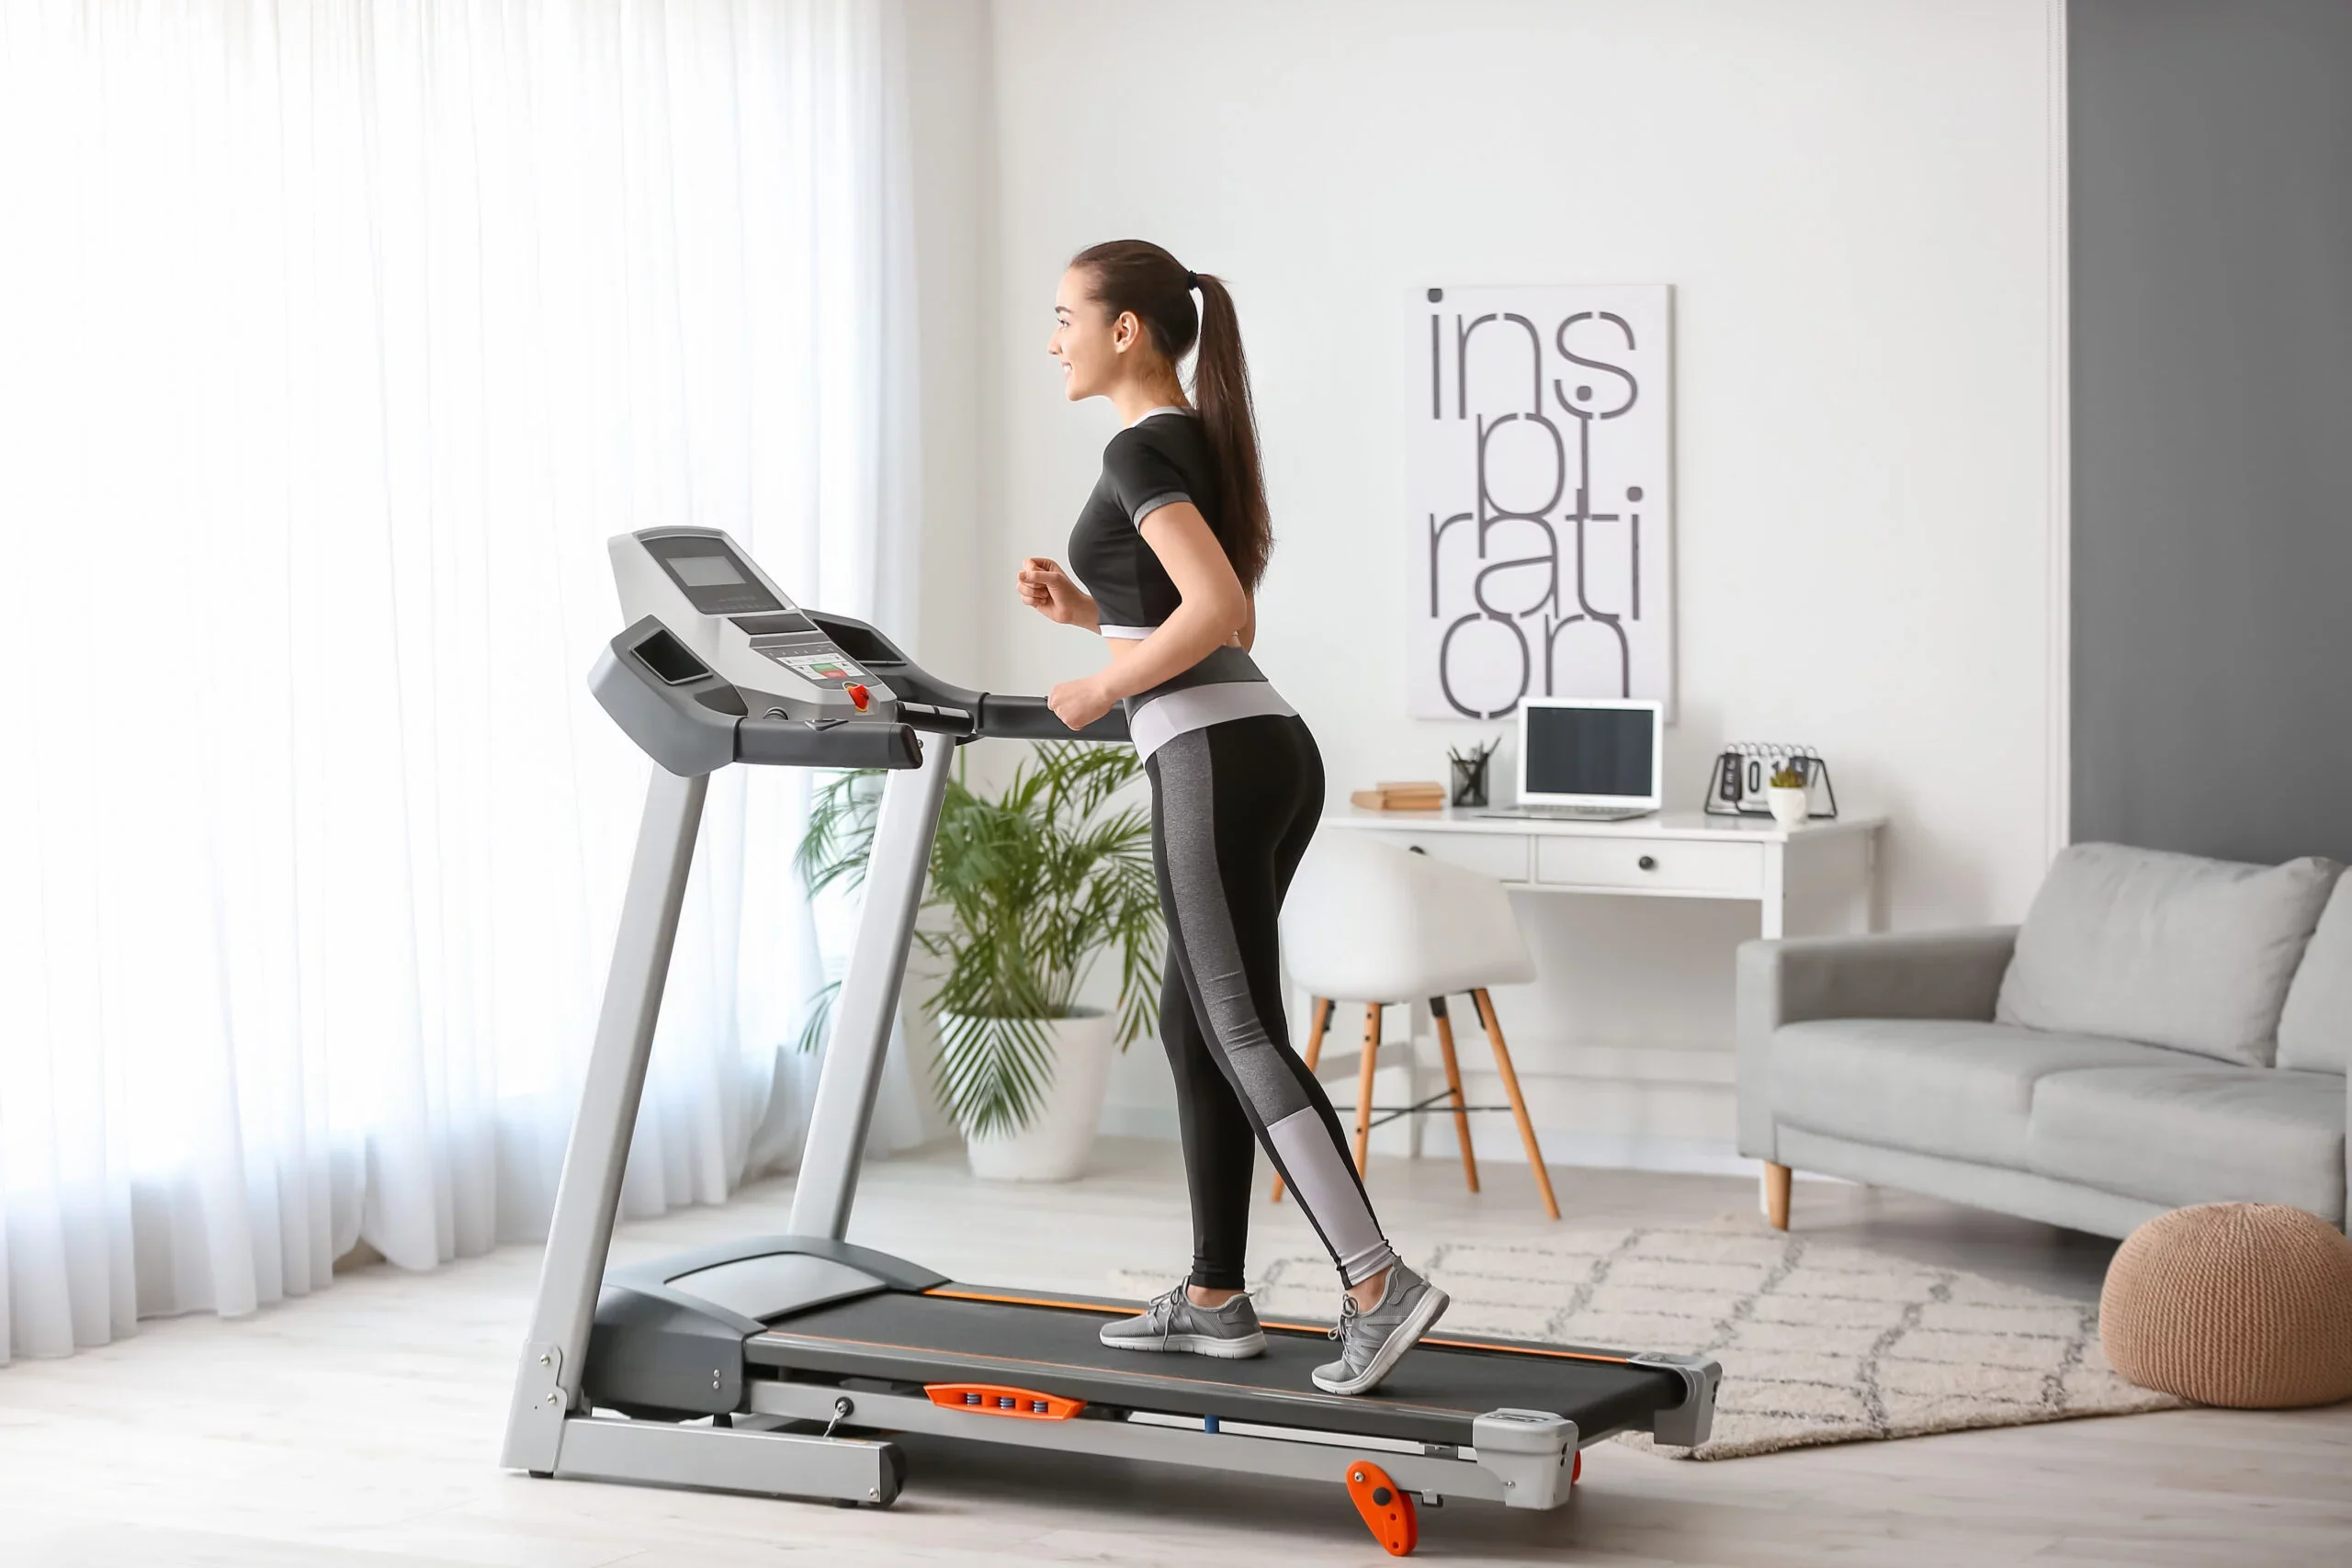 Treadmill exercise at home